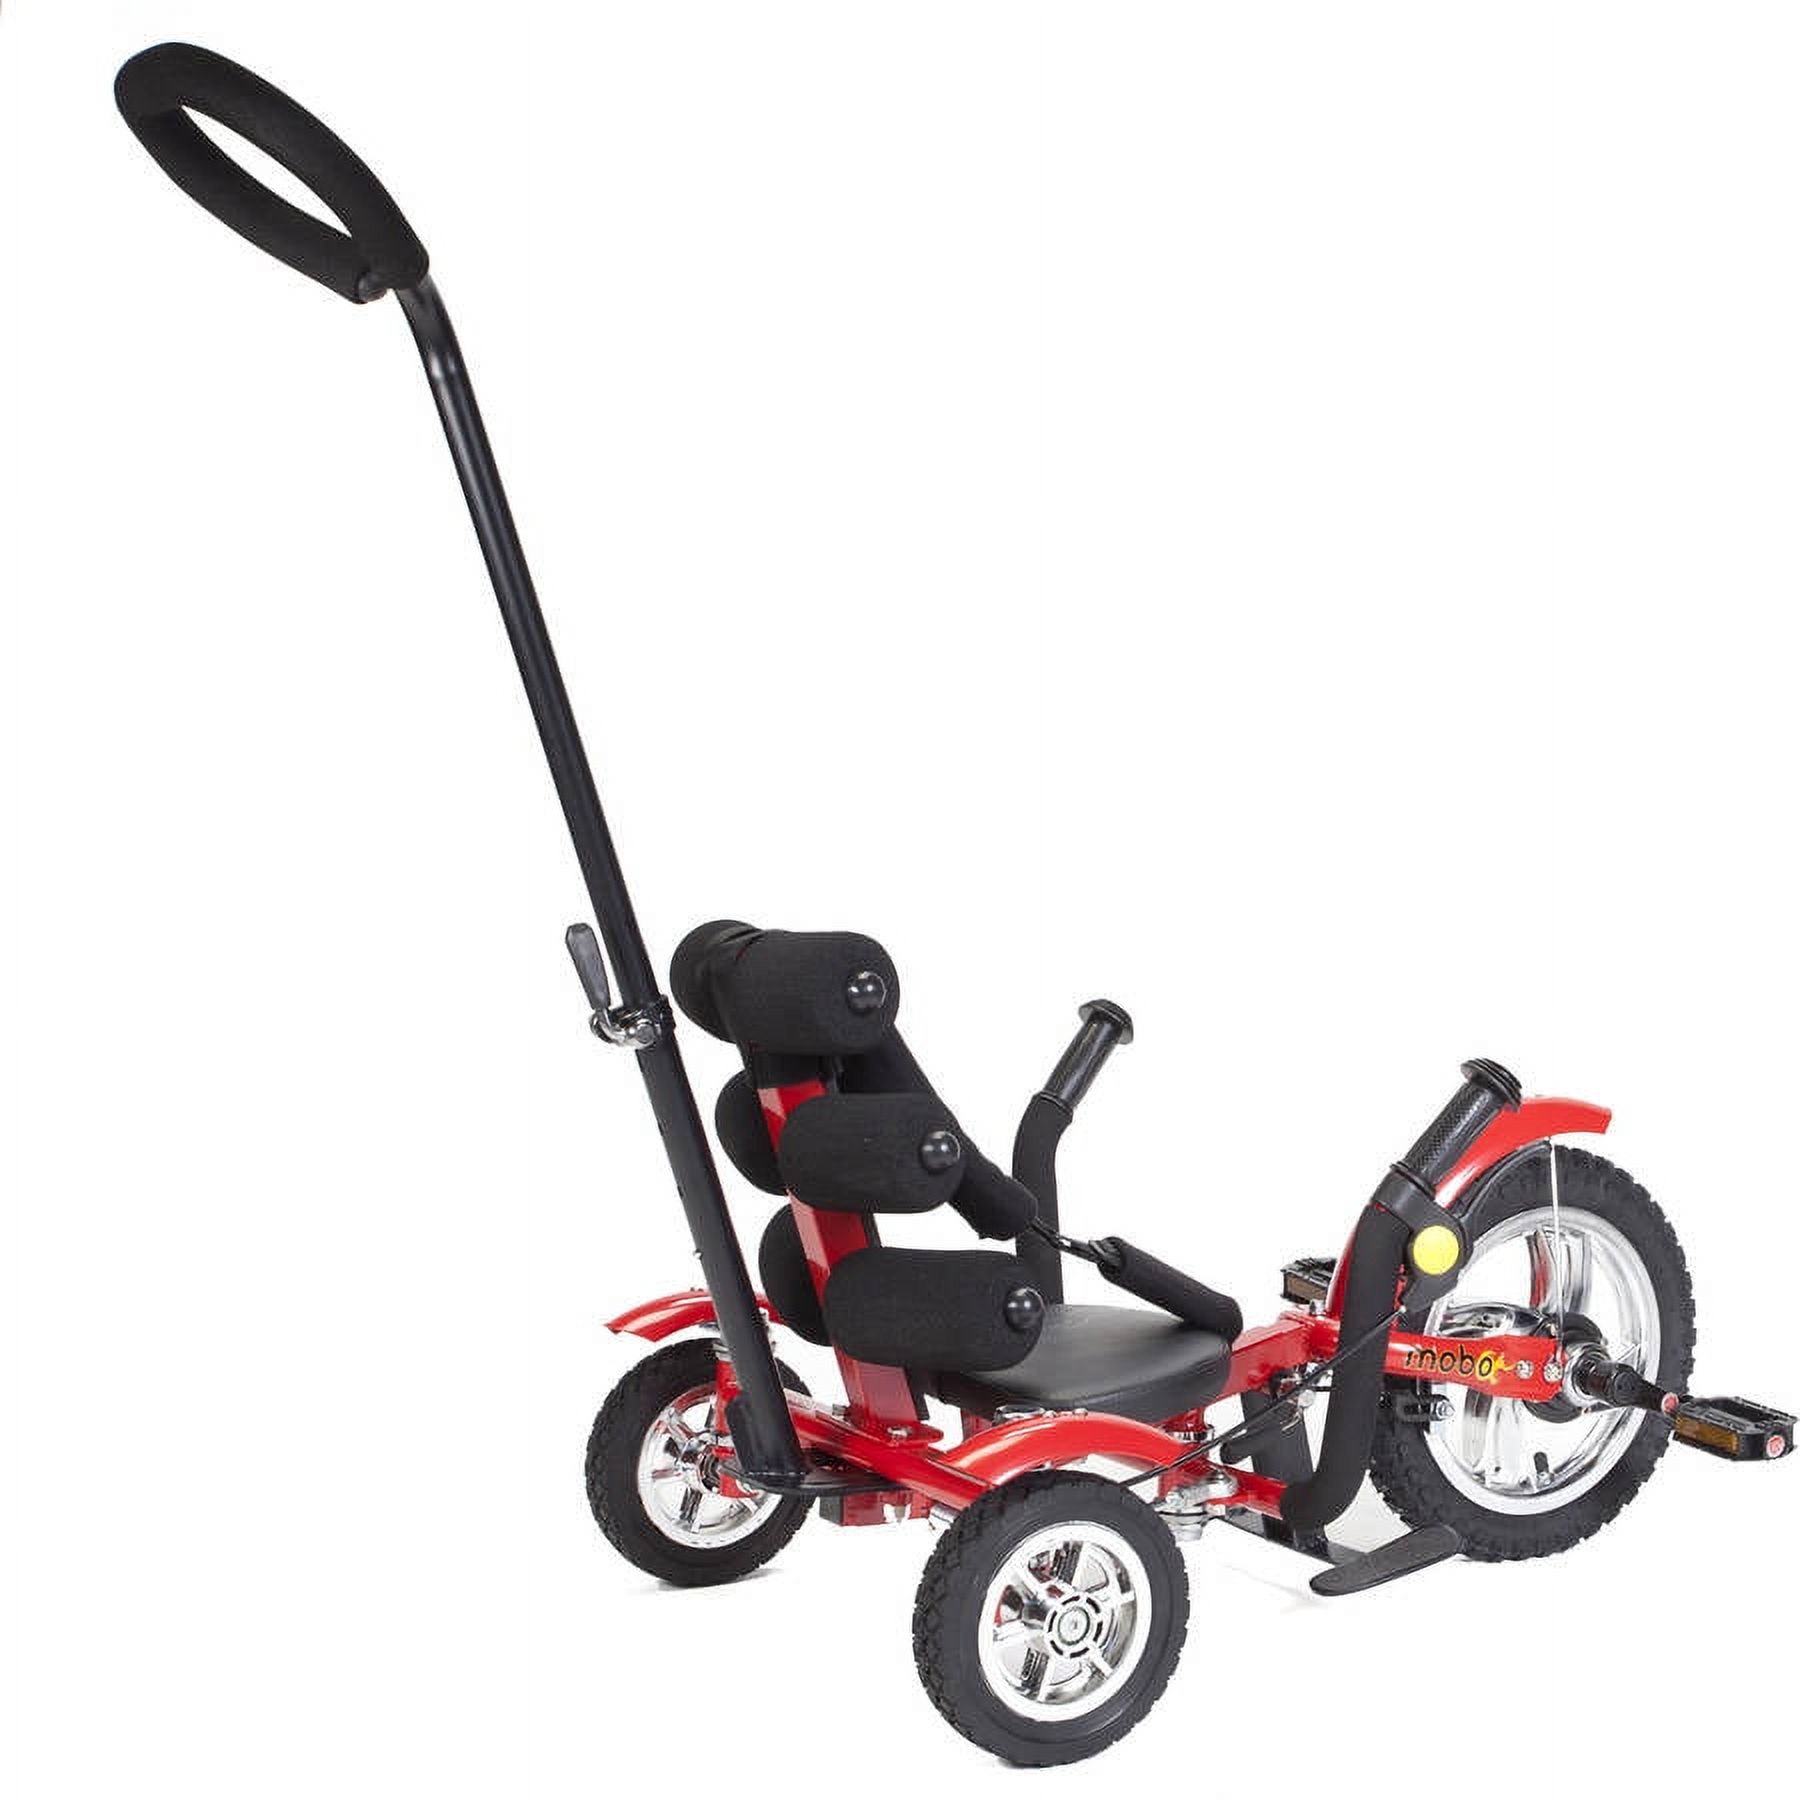 Mobo Mega Mini: The Roll-to-Ride 3-Wheeled Cruiser Tricycle, Push & Pedal Ride On Toy, Red - image 2 of 6